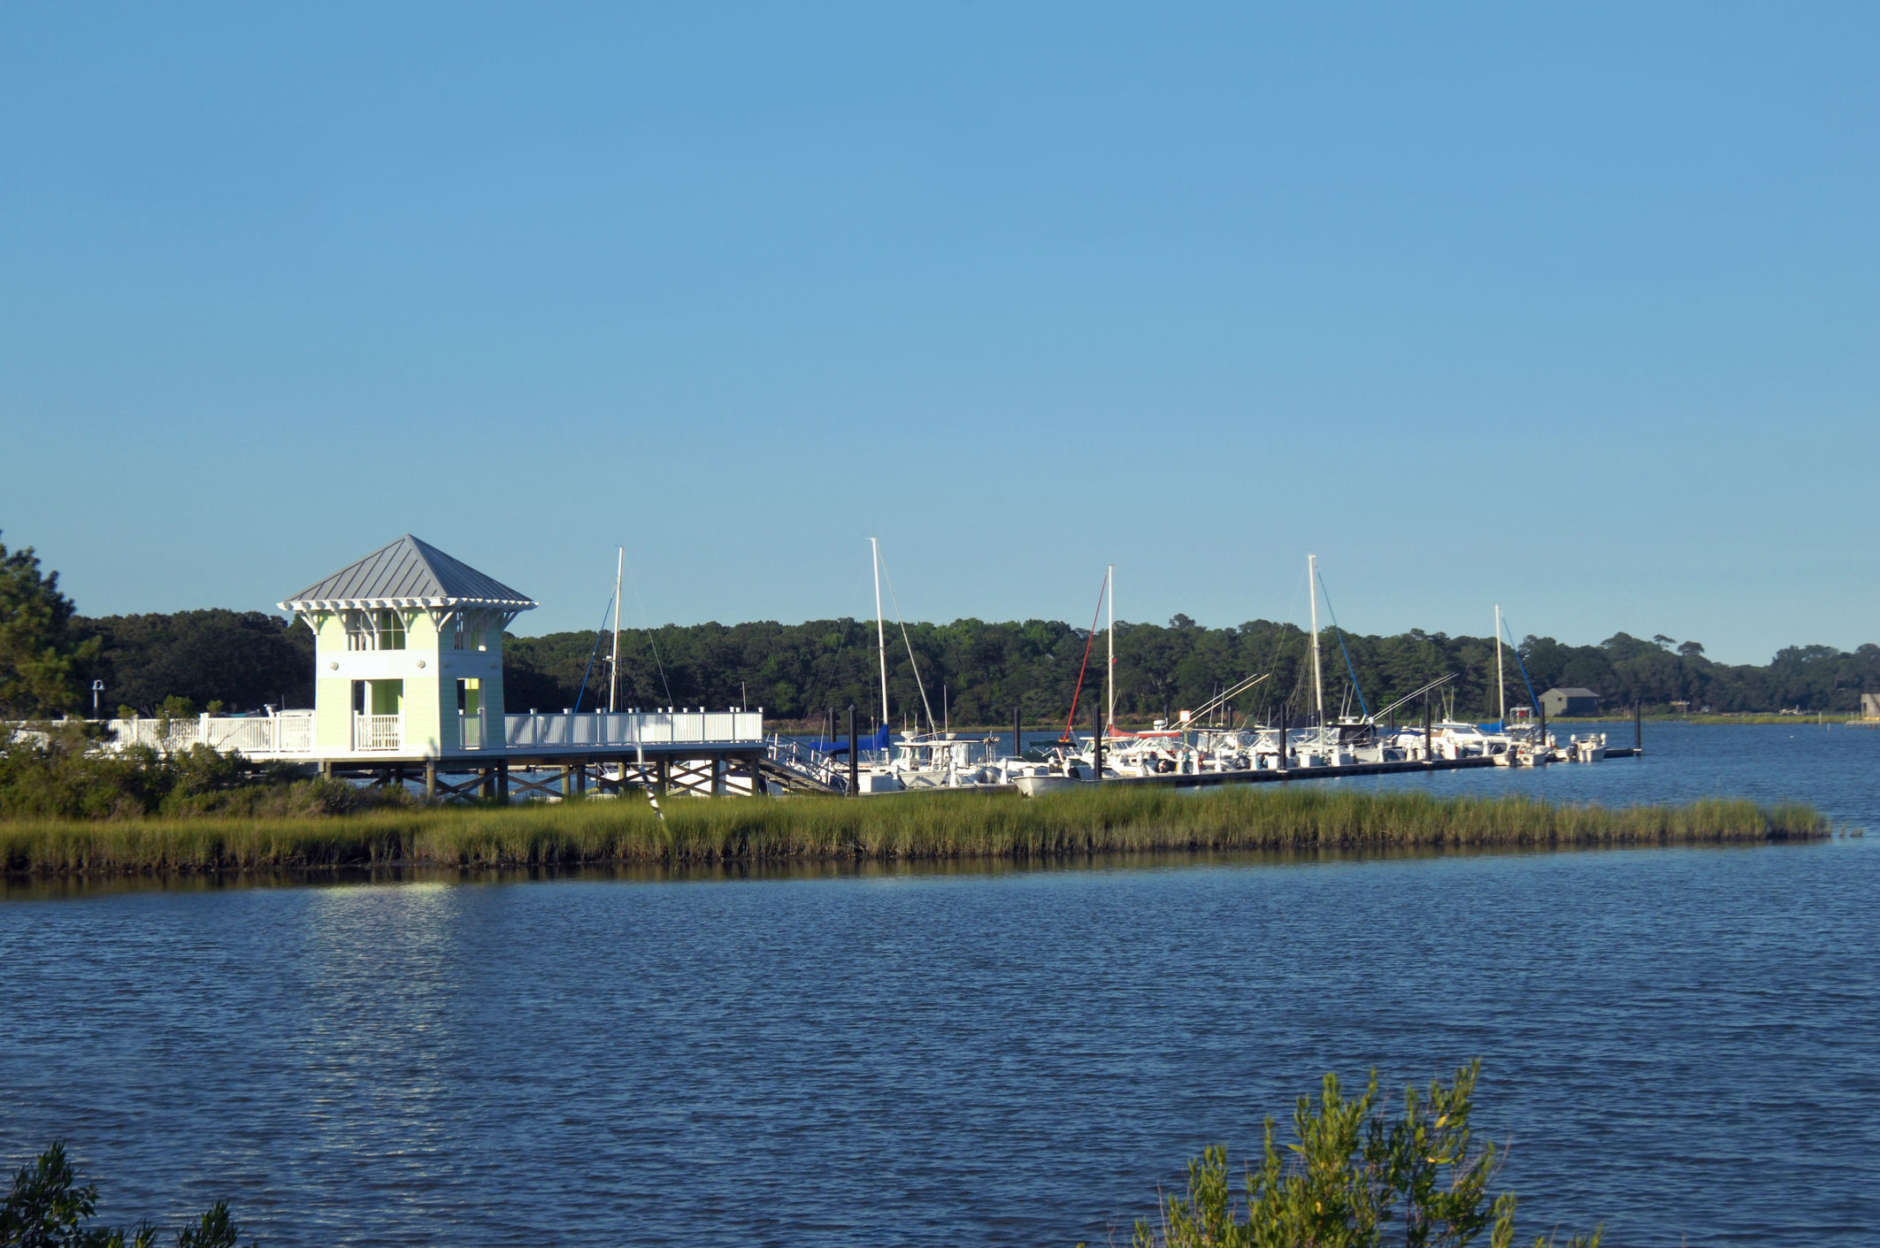 Cape Charles Marina has boats and yachts docked at pier.  Evening light darkens water and landscape on Assateague Island, Virginia.